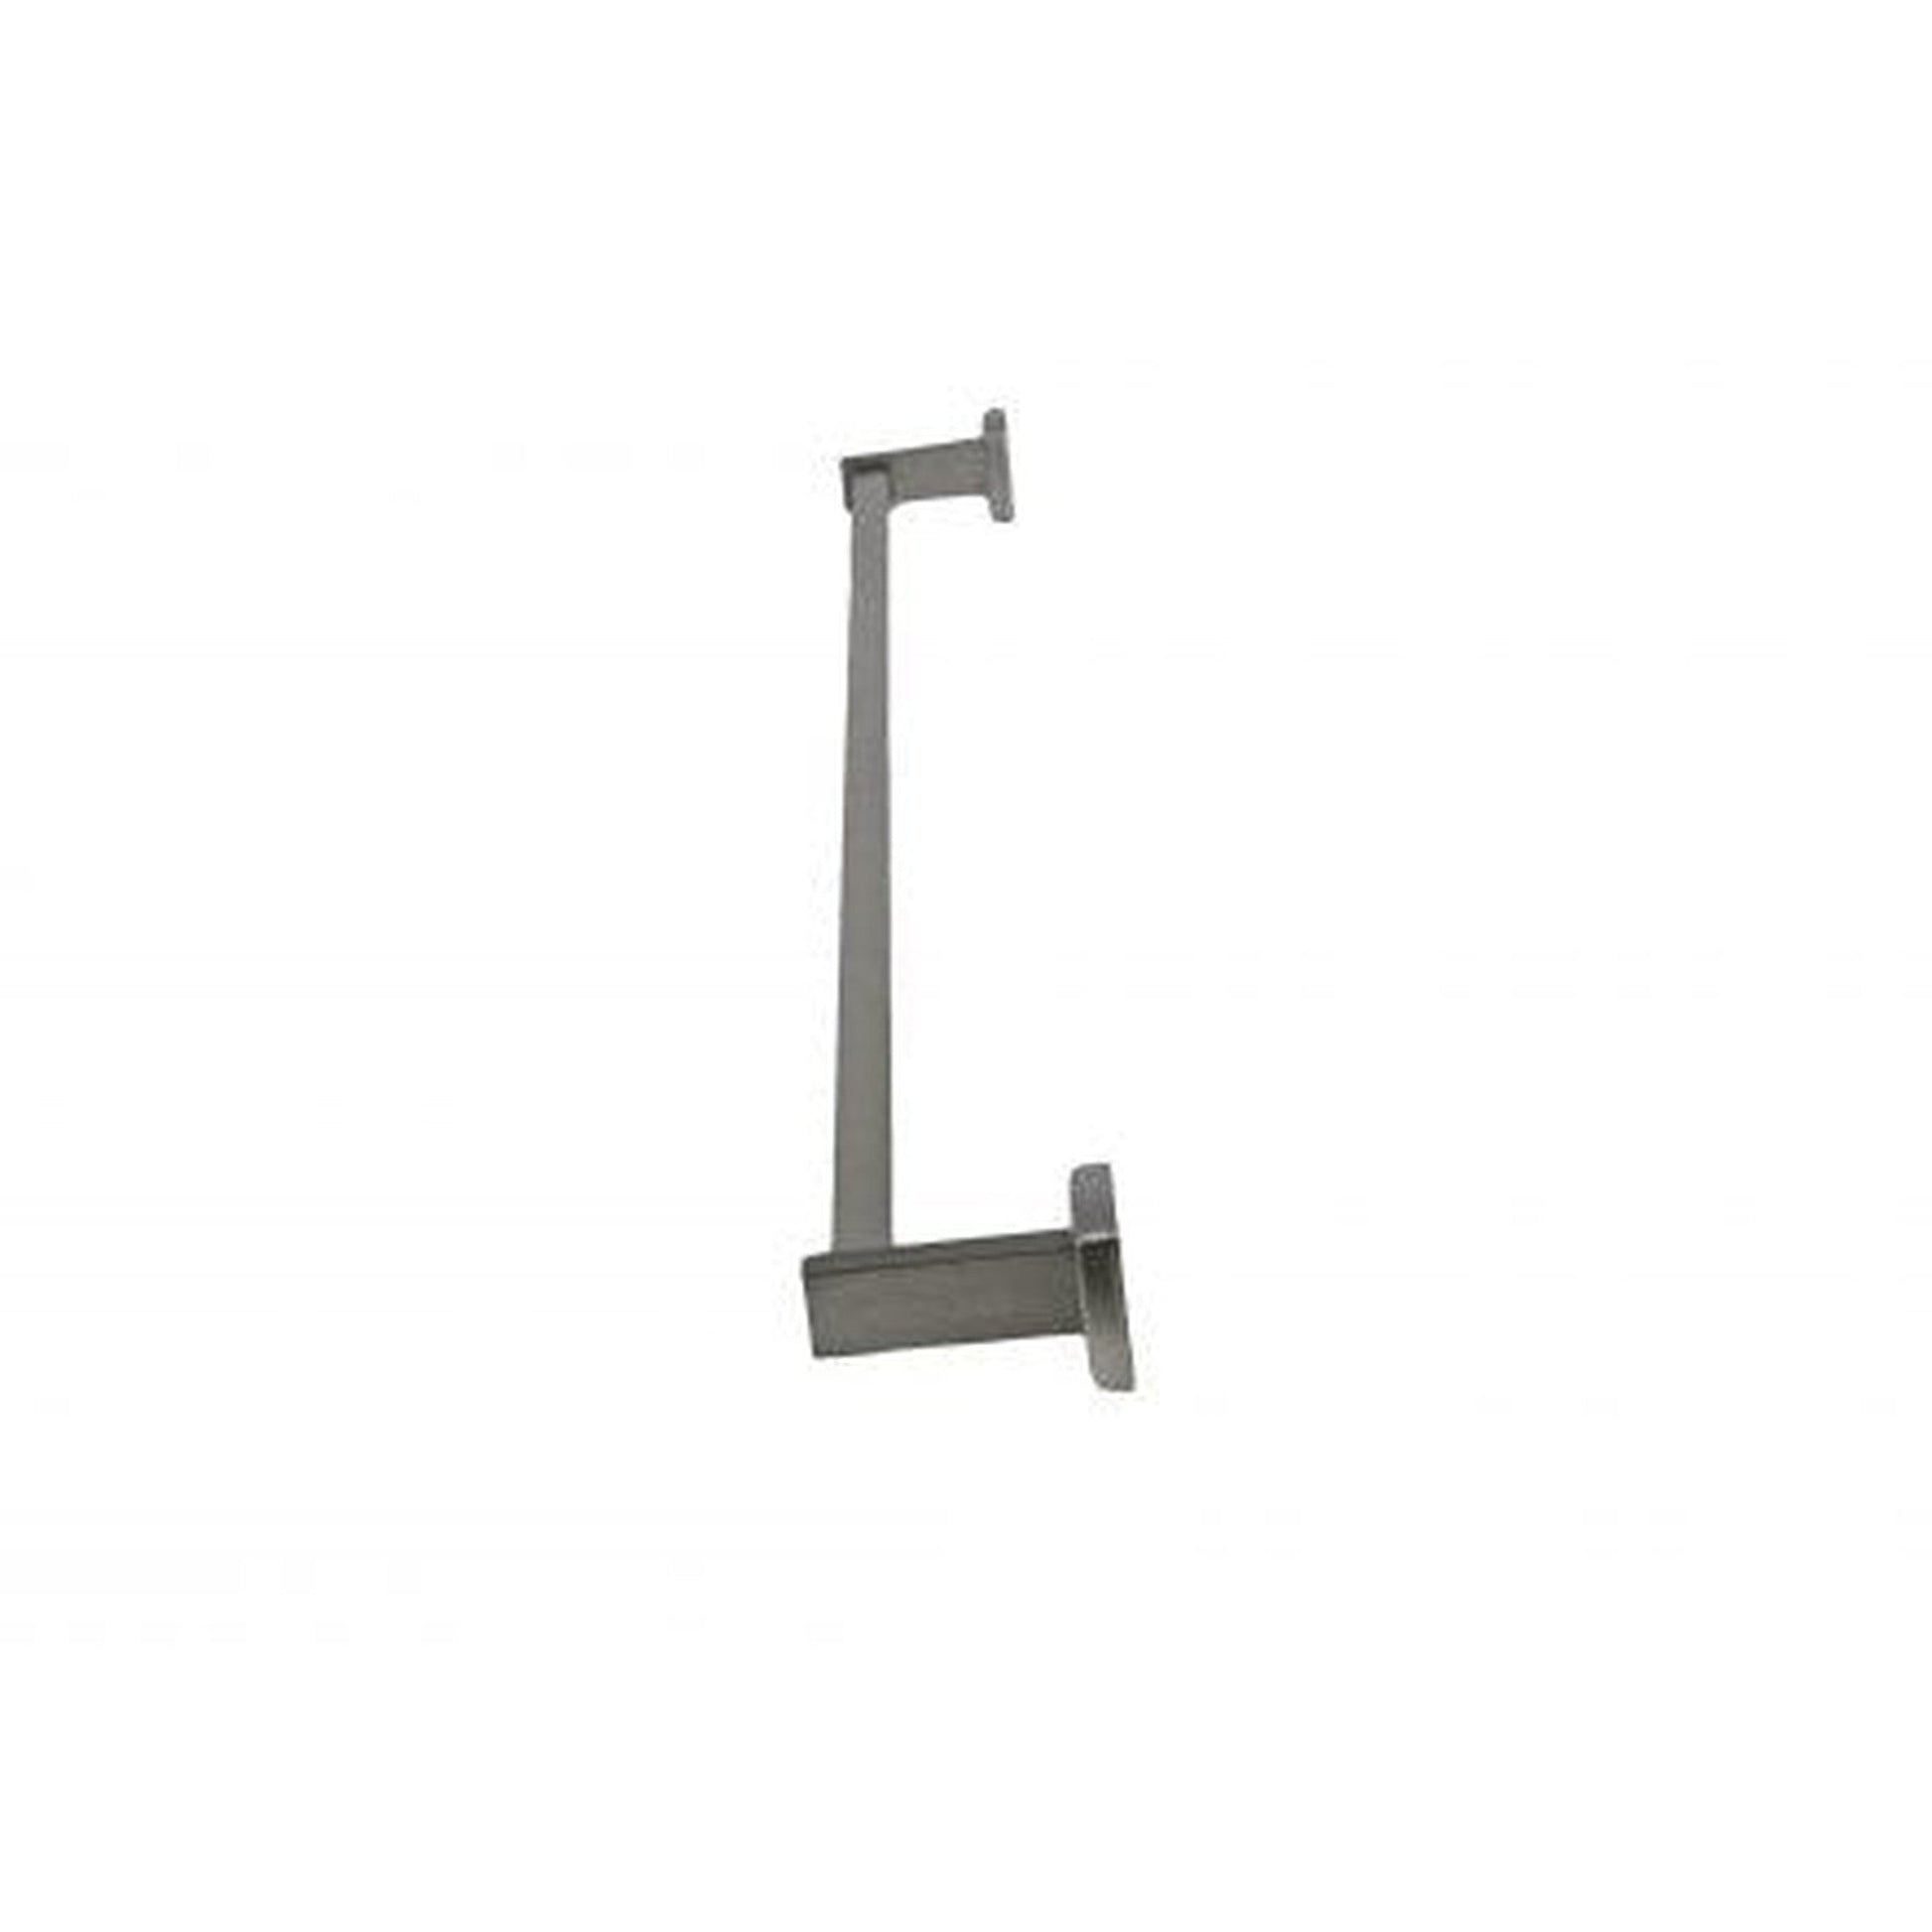 Frost 36 x 3.5 x 3 Brushed Stainless Steel Towel Rack